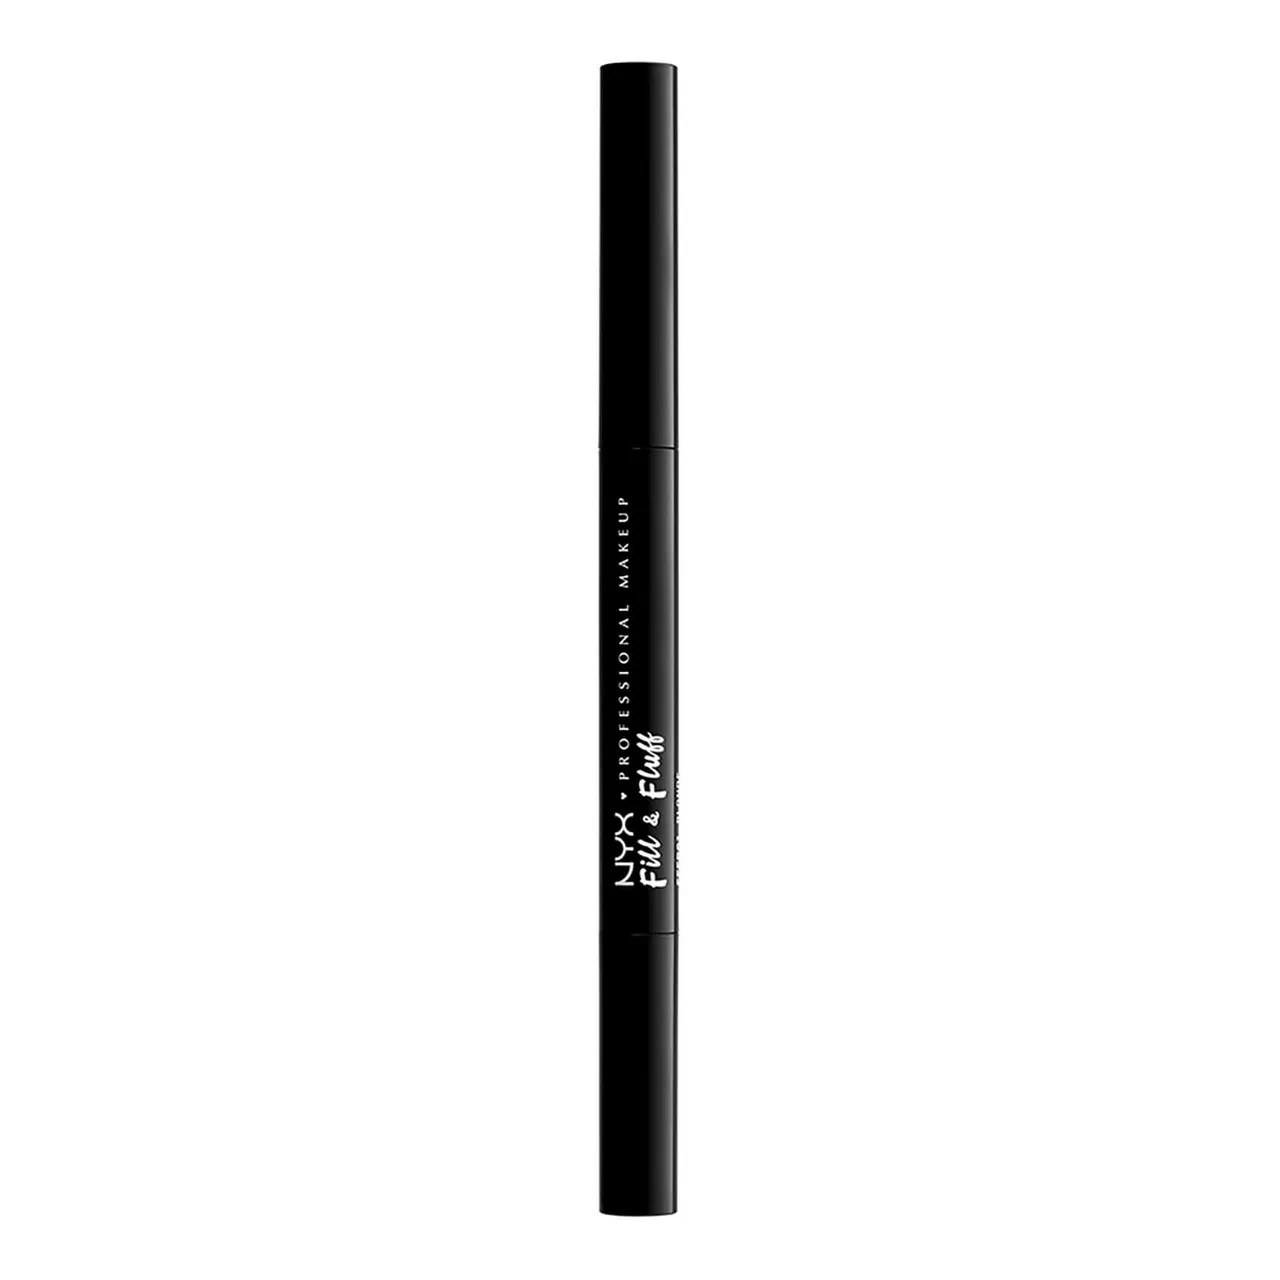 NYX Professional Makeup Fill and Fluff Eyebrow Pomade Pencil 0.2g (Various Shades) - Blonde